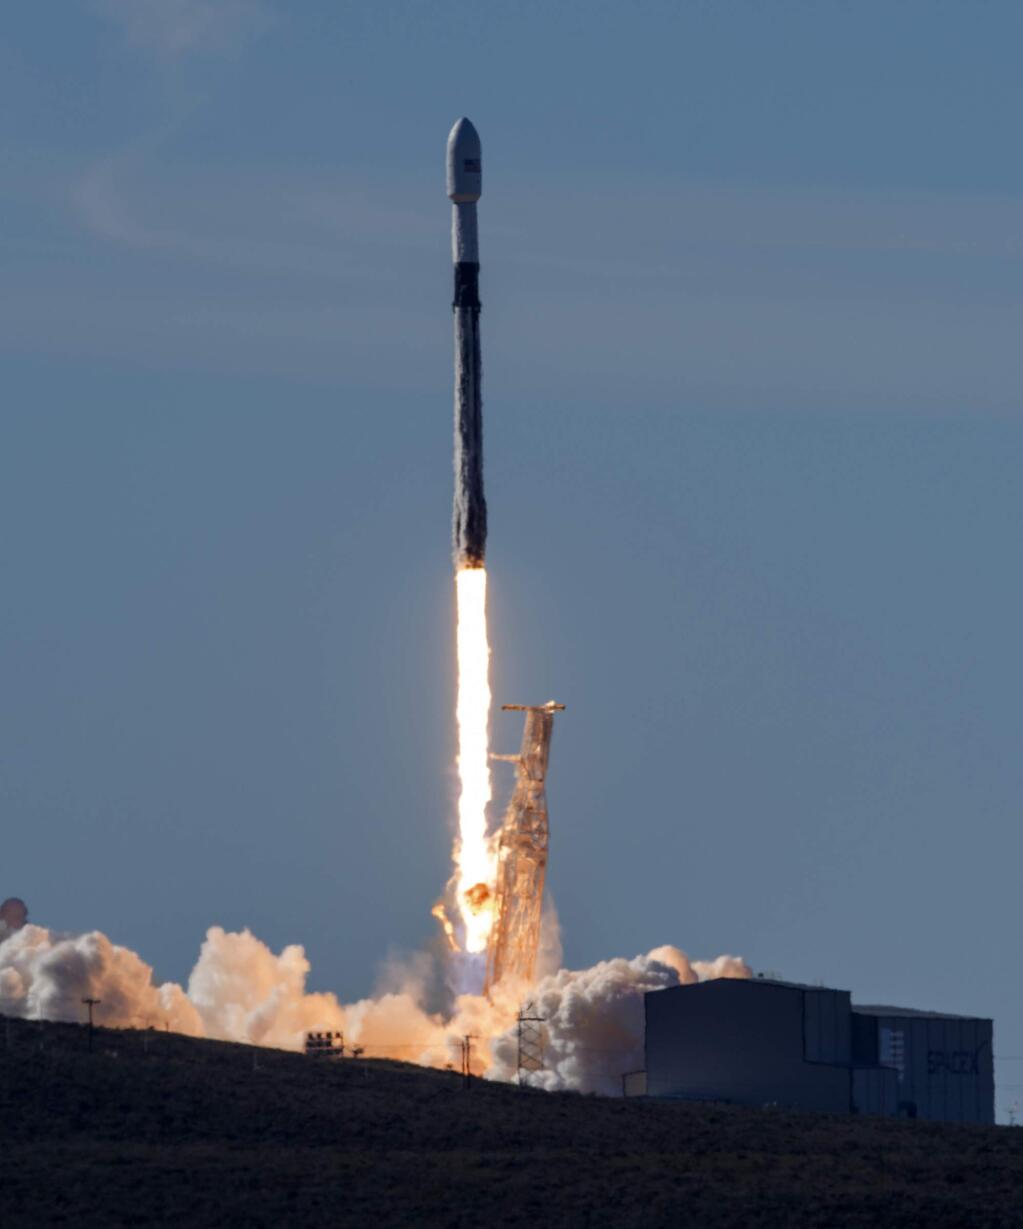 FILE - In this Dec. 3, 2018, file photo, In this photo provided by the U.S. Air Force, a SpaceX Falcon 9 rocket, carrying the Spaceflight SSO-A: SmallSat Express, launches from Space Launch Complex-4E at Vandenberg Air Force Base, Calif. President Donald Trump is expected to sign an executive order soon, possibly as early as Tuesday, Dec. 18, creating a U.S. Space Command that will better organize and advance the military‚Äôs vast operations in space, U.S. officials say. (Senior Airman Clayton Wear/U.S. Air Force via AP, File)